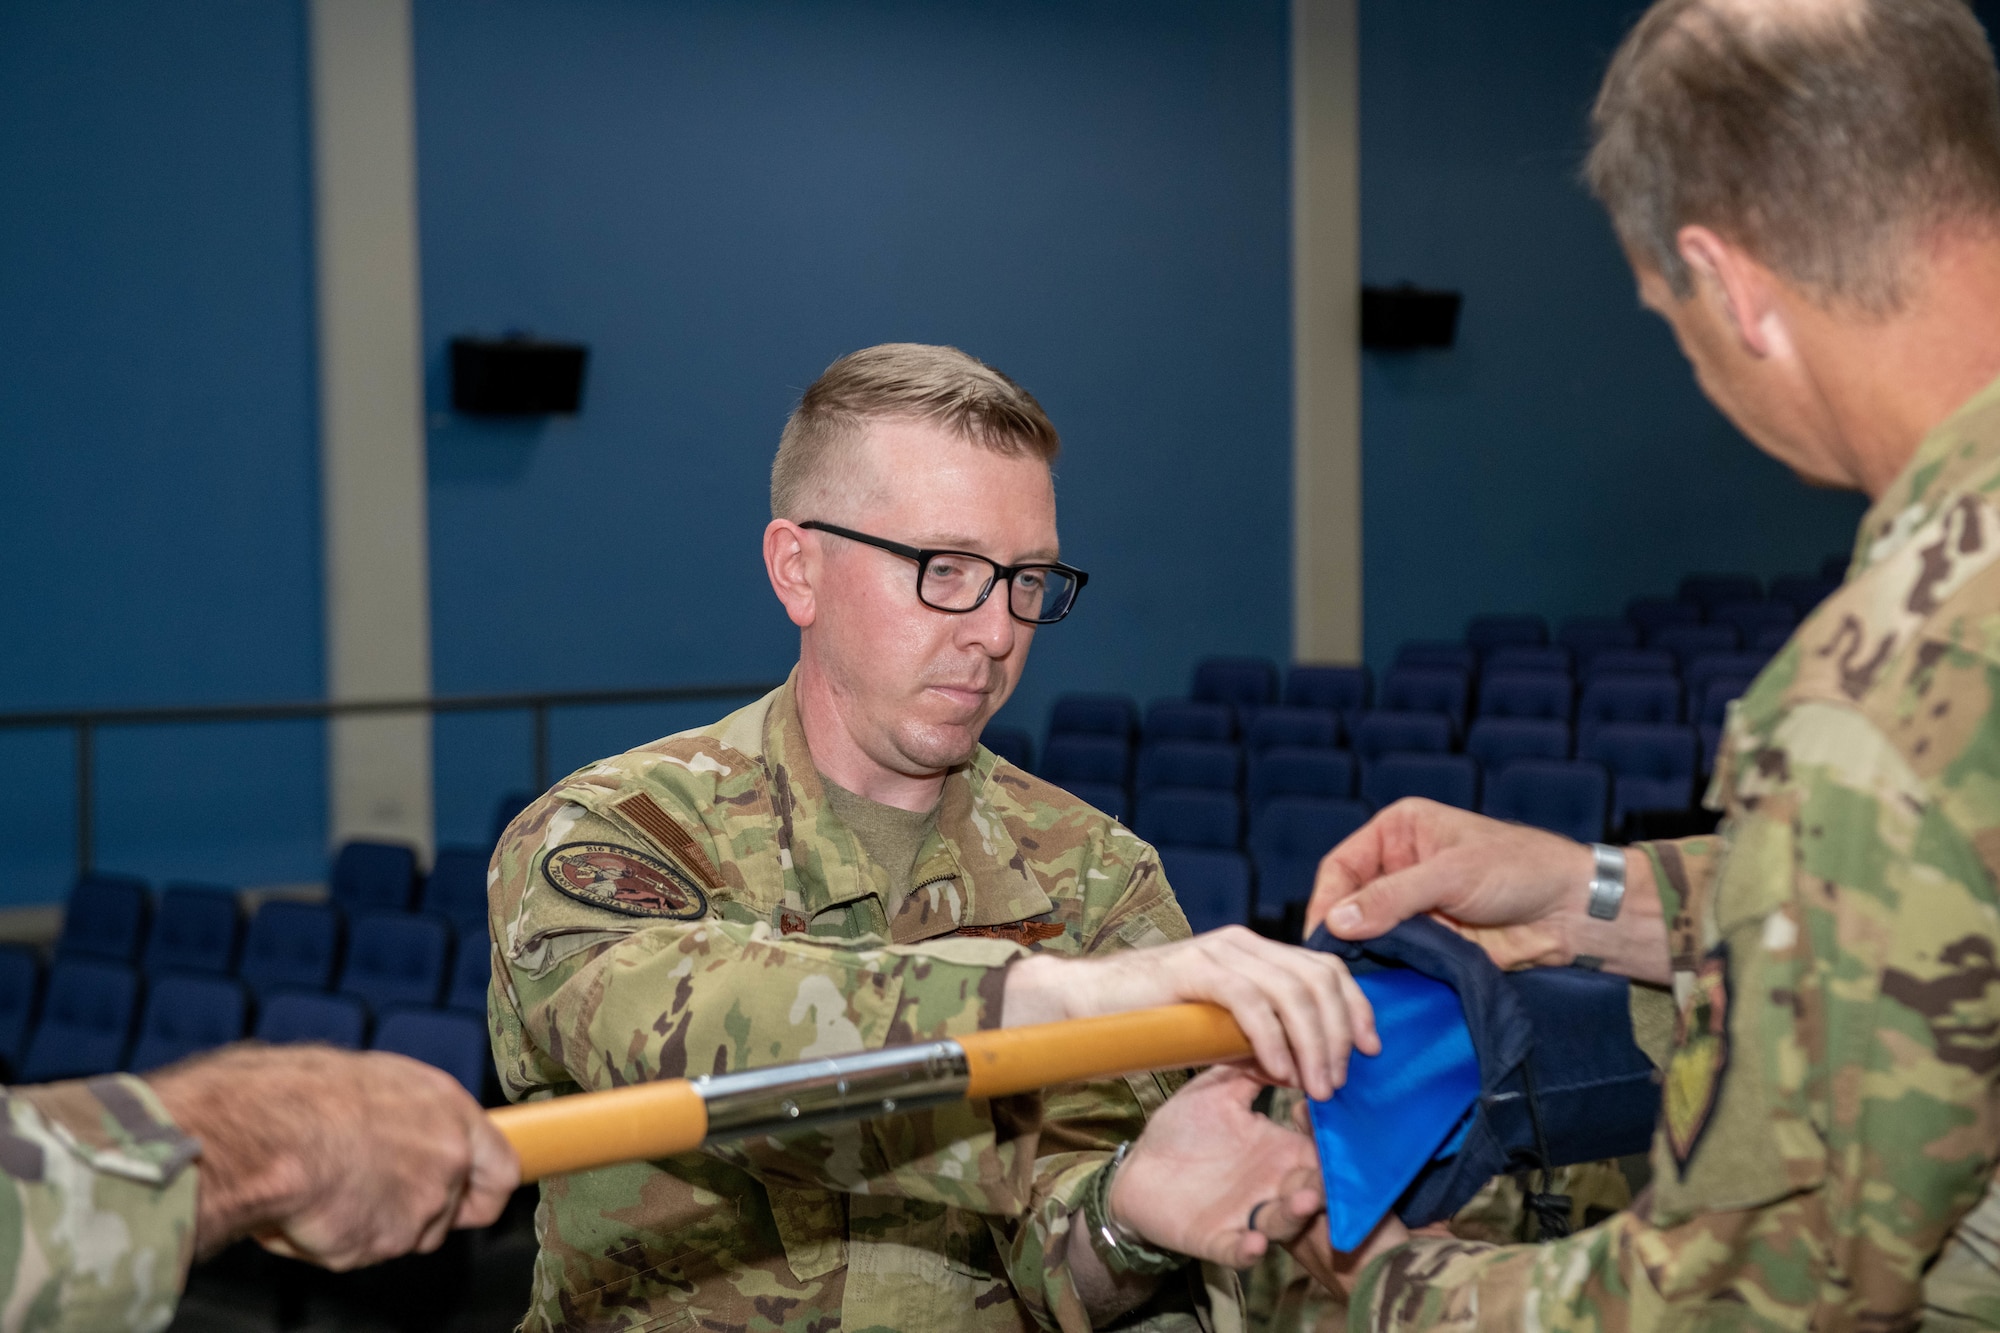 U.S. Air Force Maj. Gen. Corey Martin (right), 18th Air Force Commander (right) and Lt. Col. Daniel Naske (left), 816th Expeditionary Airlift Squadron Commander, case the unit’s colors during an inactivation ceremony Sept. 30, 2022 at Al Udeid Air Base, Qatar. The 816th EAS has been activated and inactivated multiple times in its history, which dates back as far as WWII. (U.S. Air National Guard photo by Airman 1st Class Constantine Bambakidis)